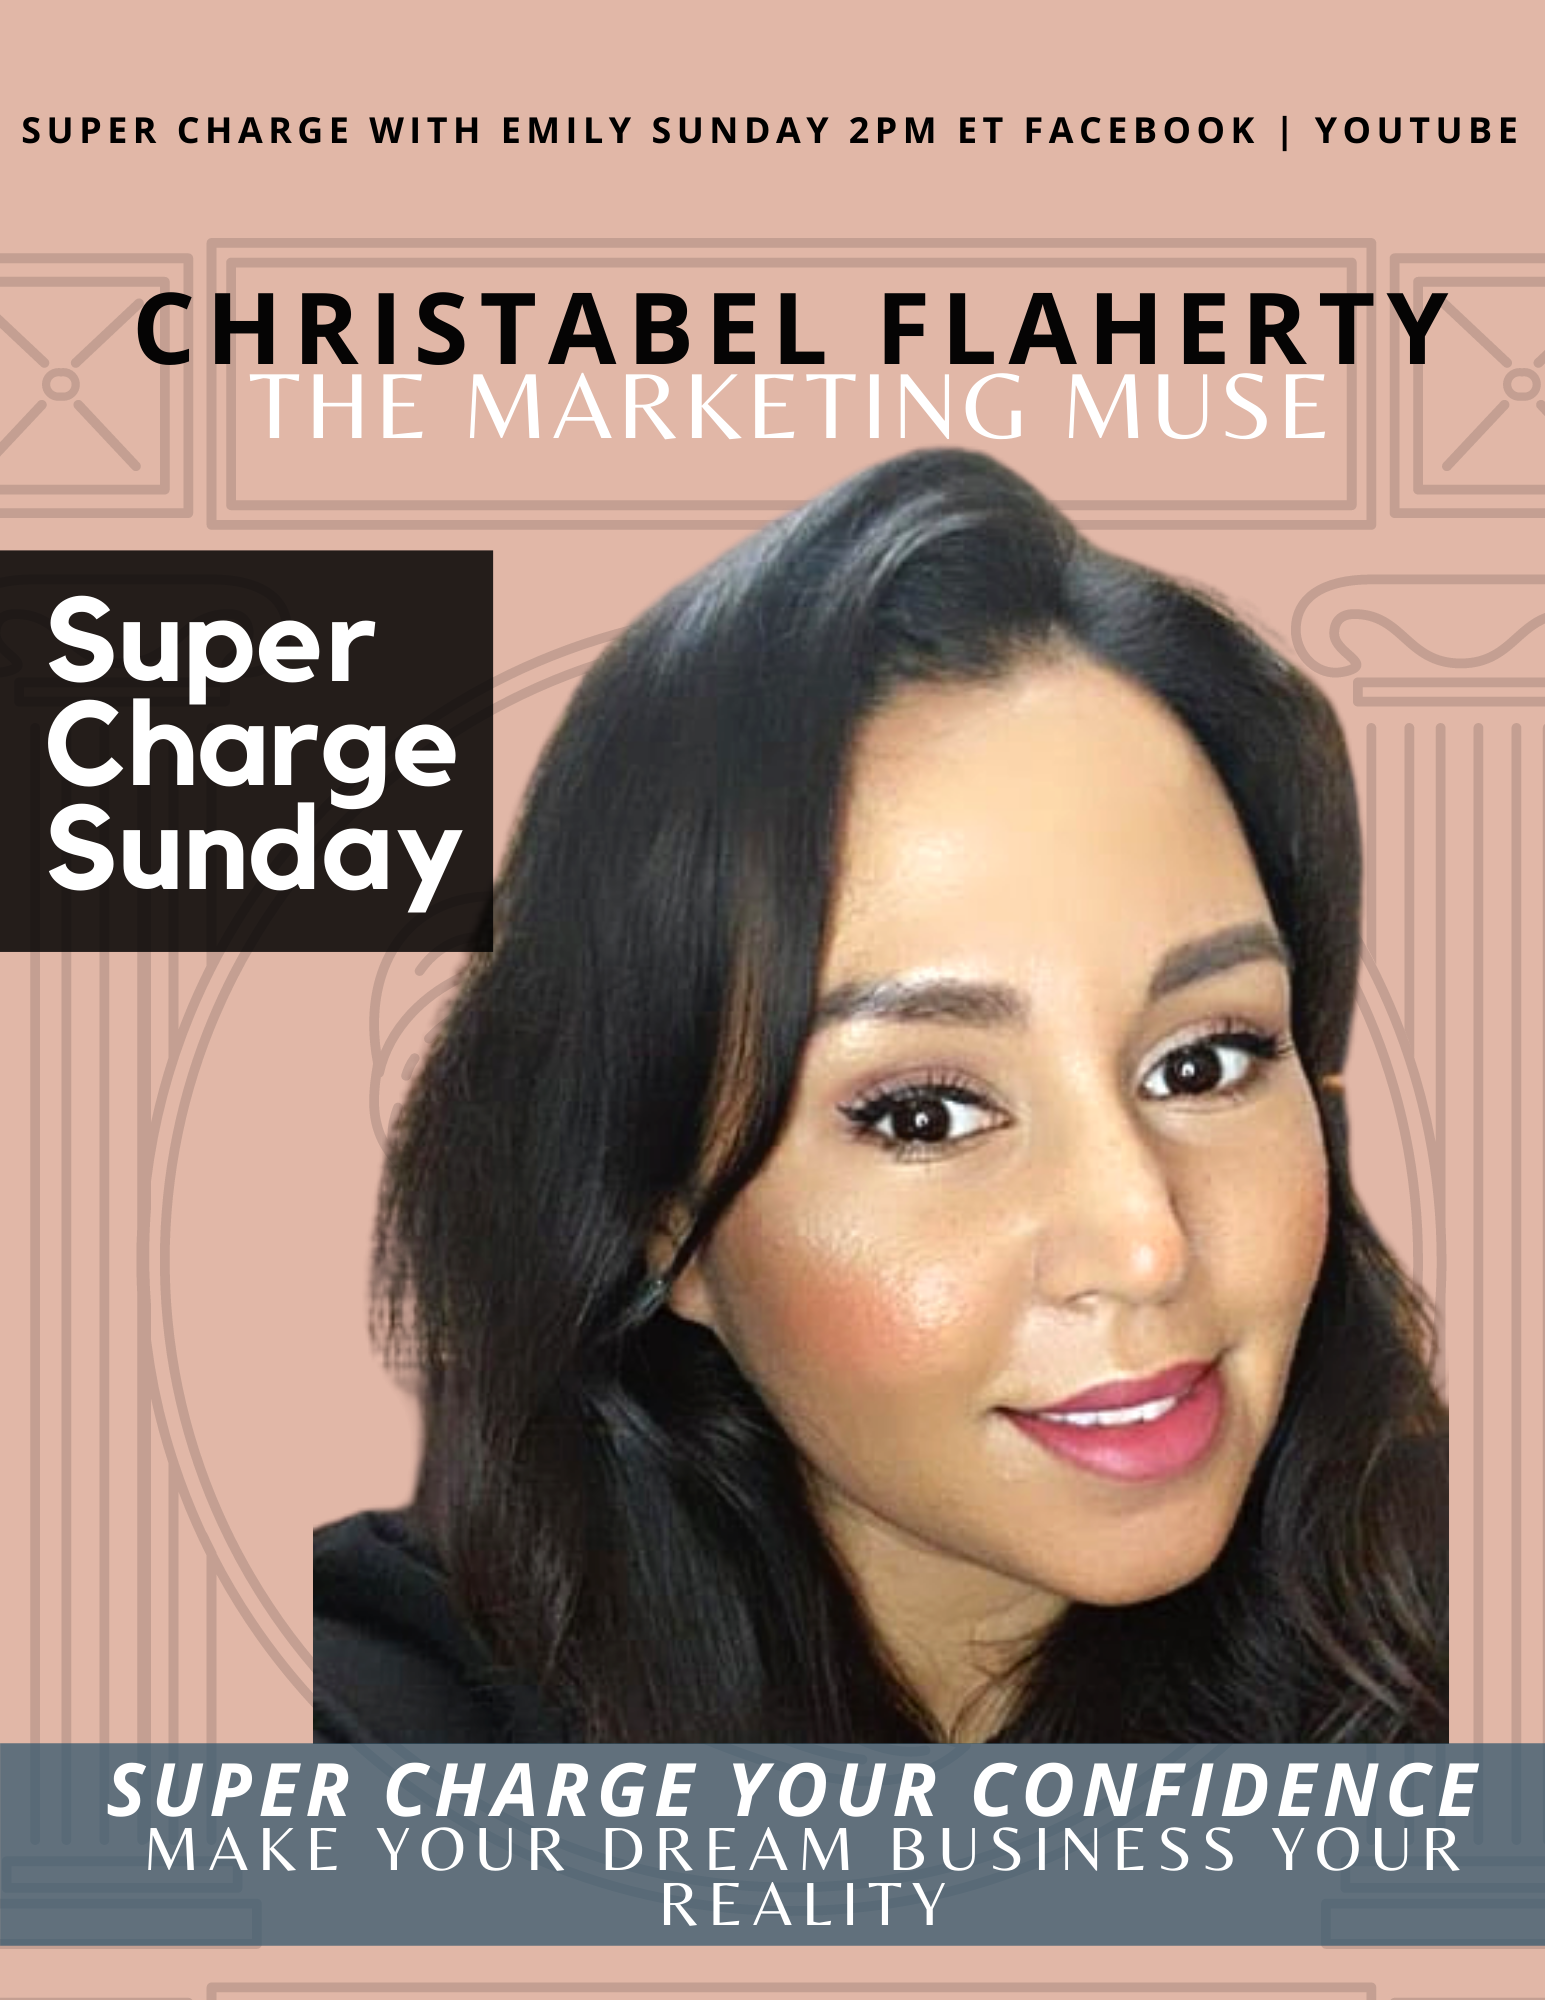 Christabel Flaherty, The Marketing Muse, Super Charge Sunday